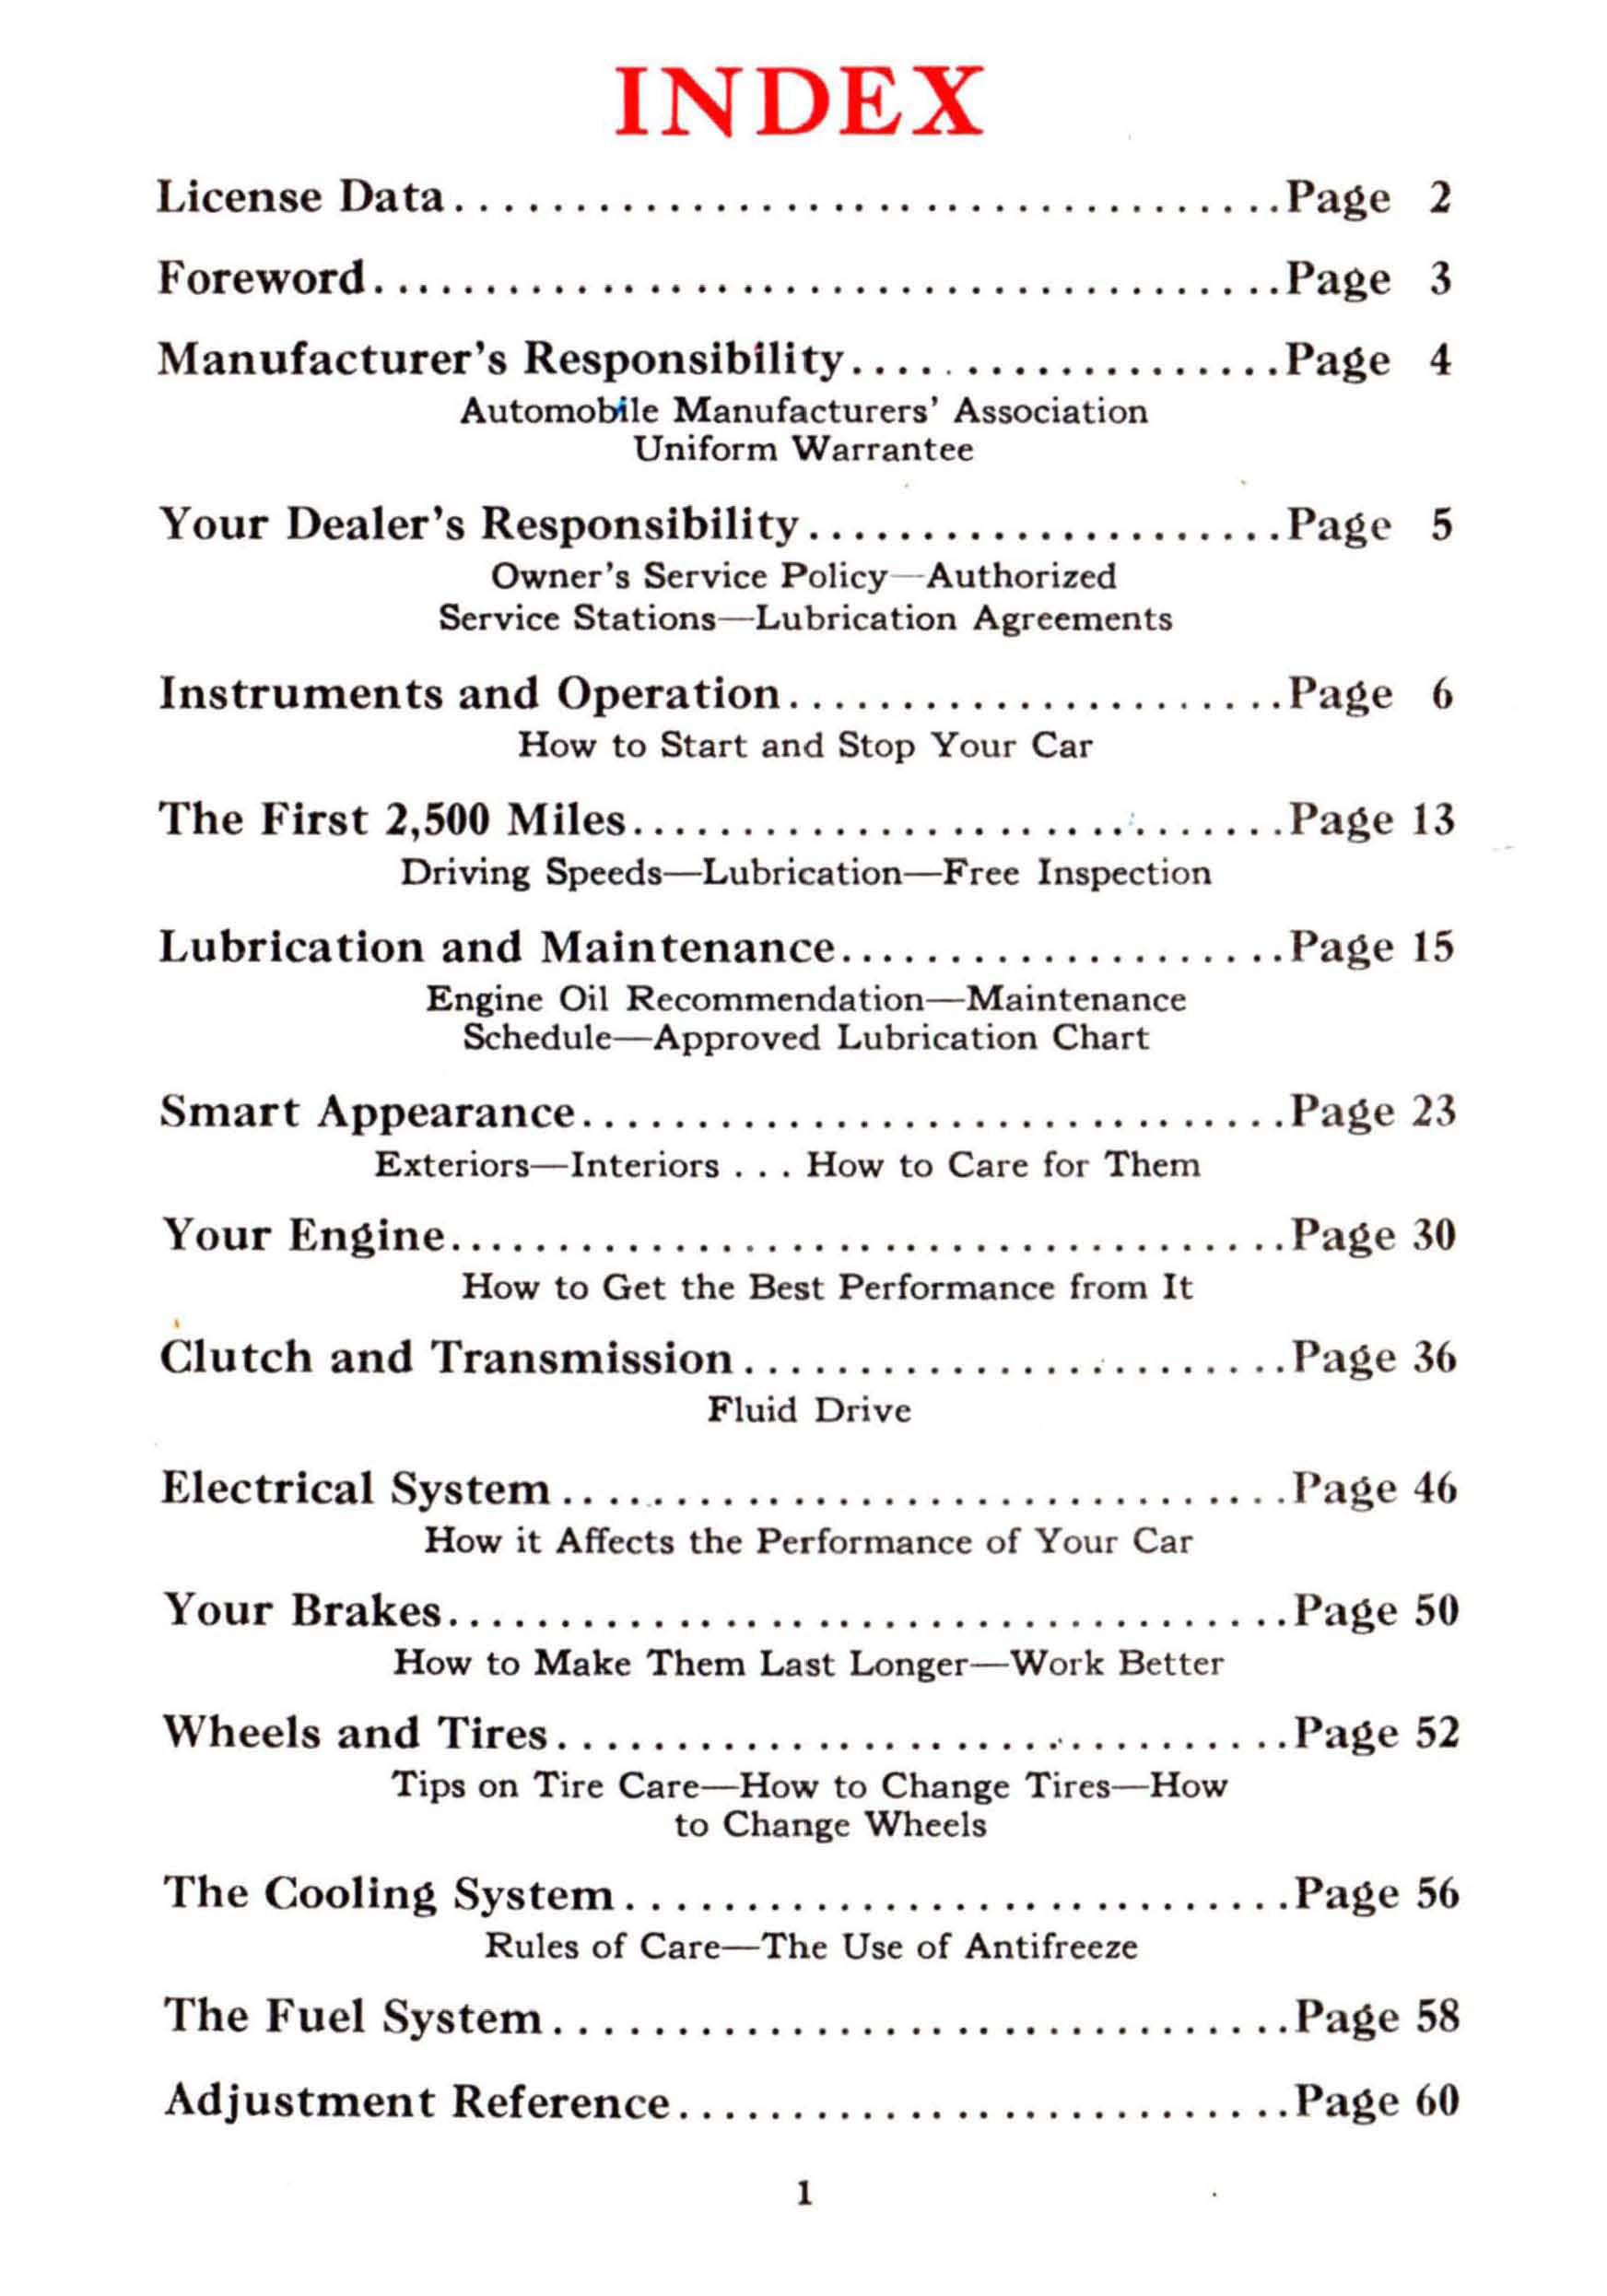 1941_Dodge_Owners_Manual-01